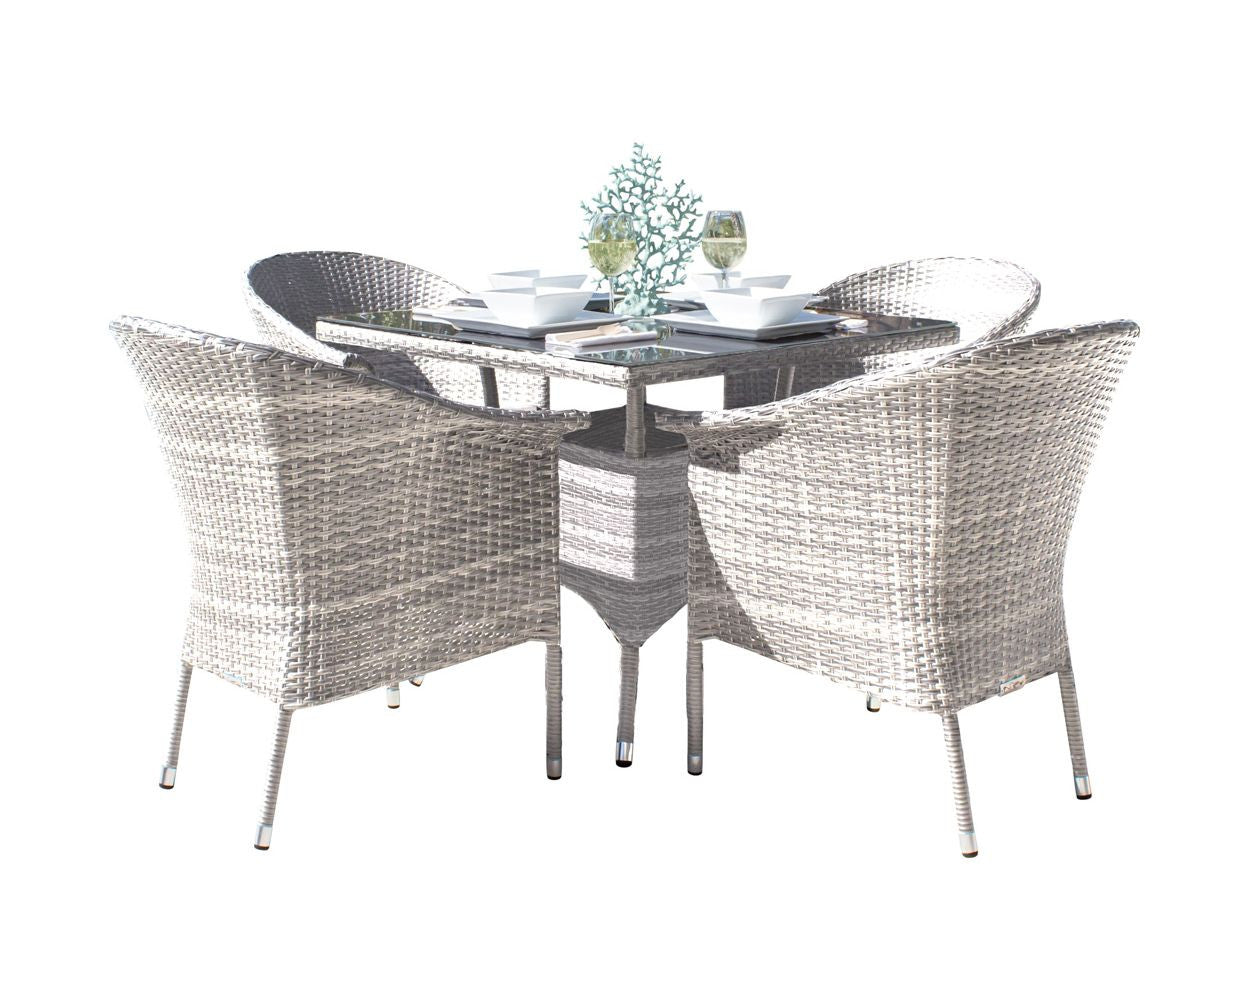 Hospitality Rattan Athens 5 PC Woven Armchair Dining Set with Cushions